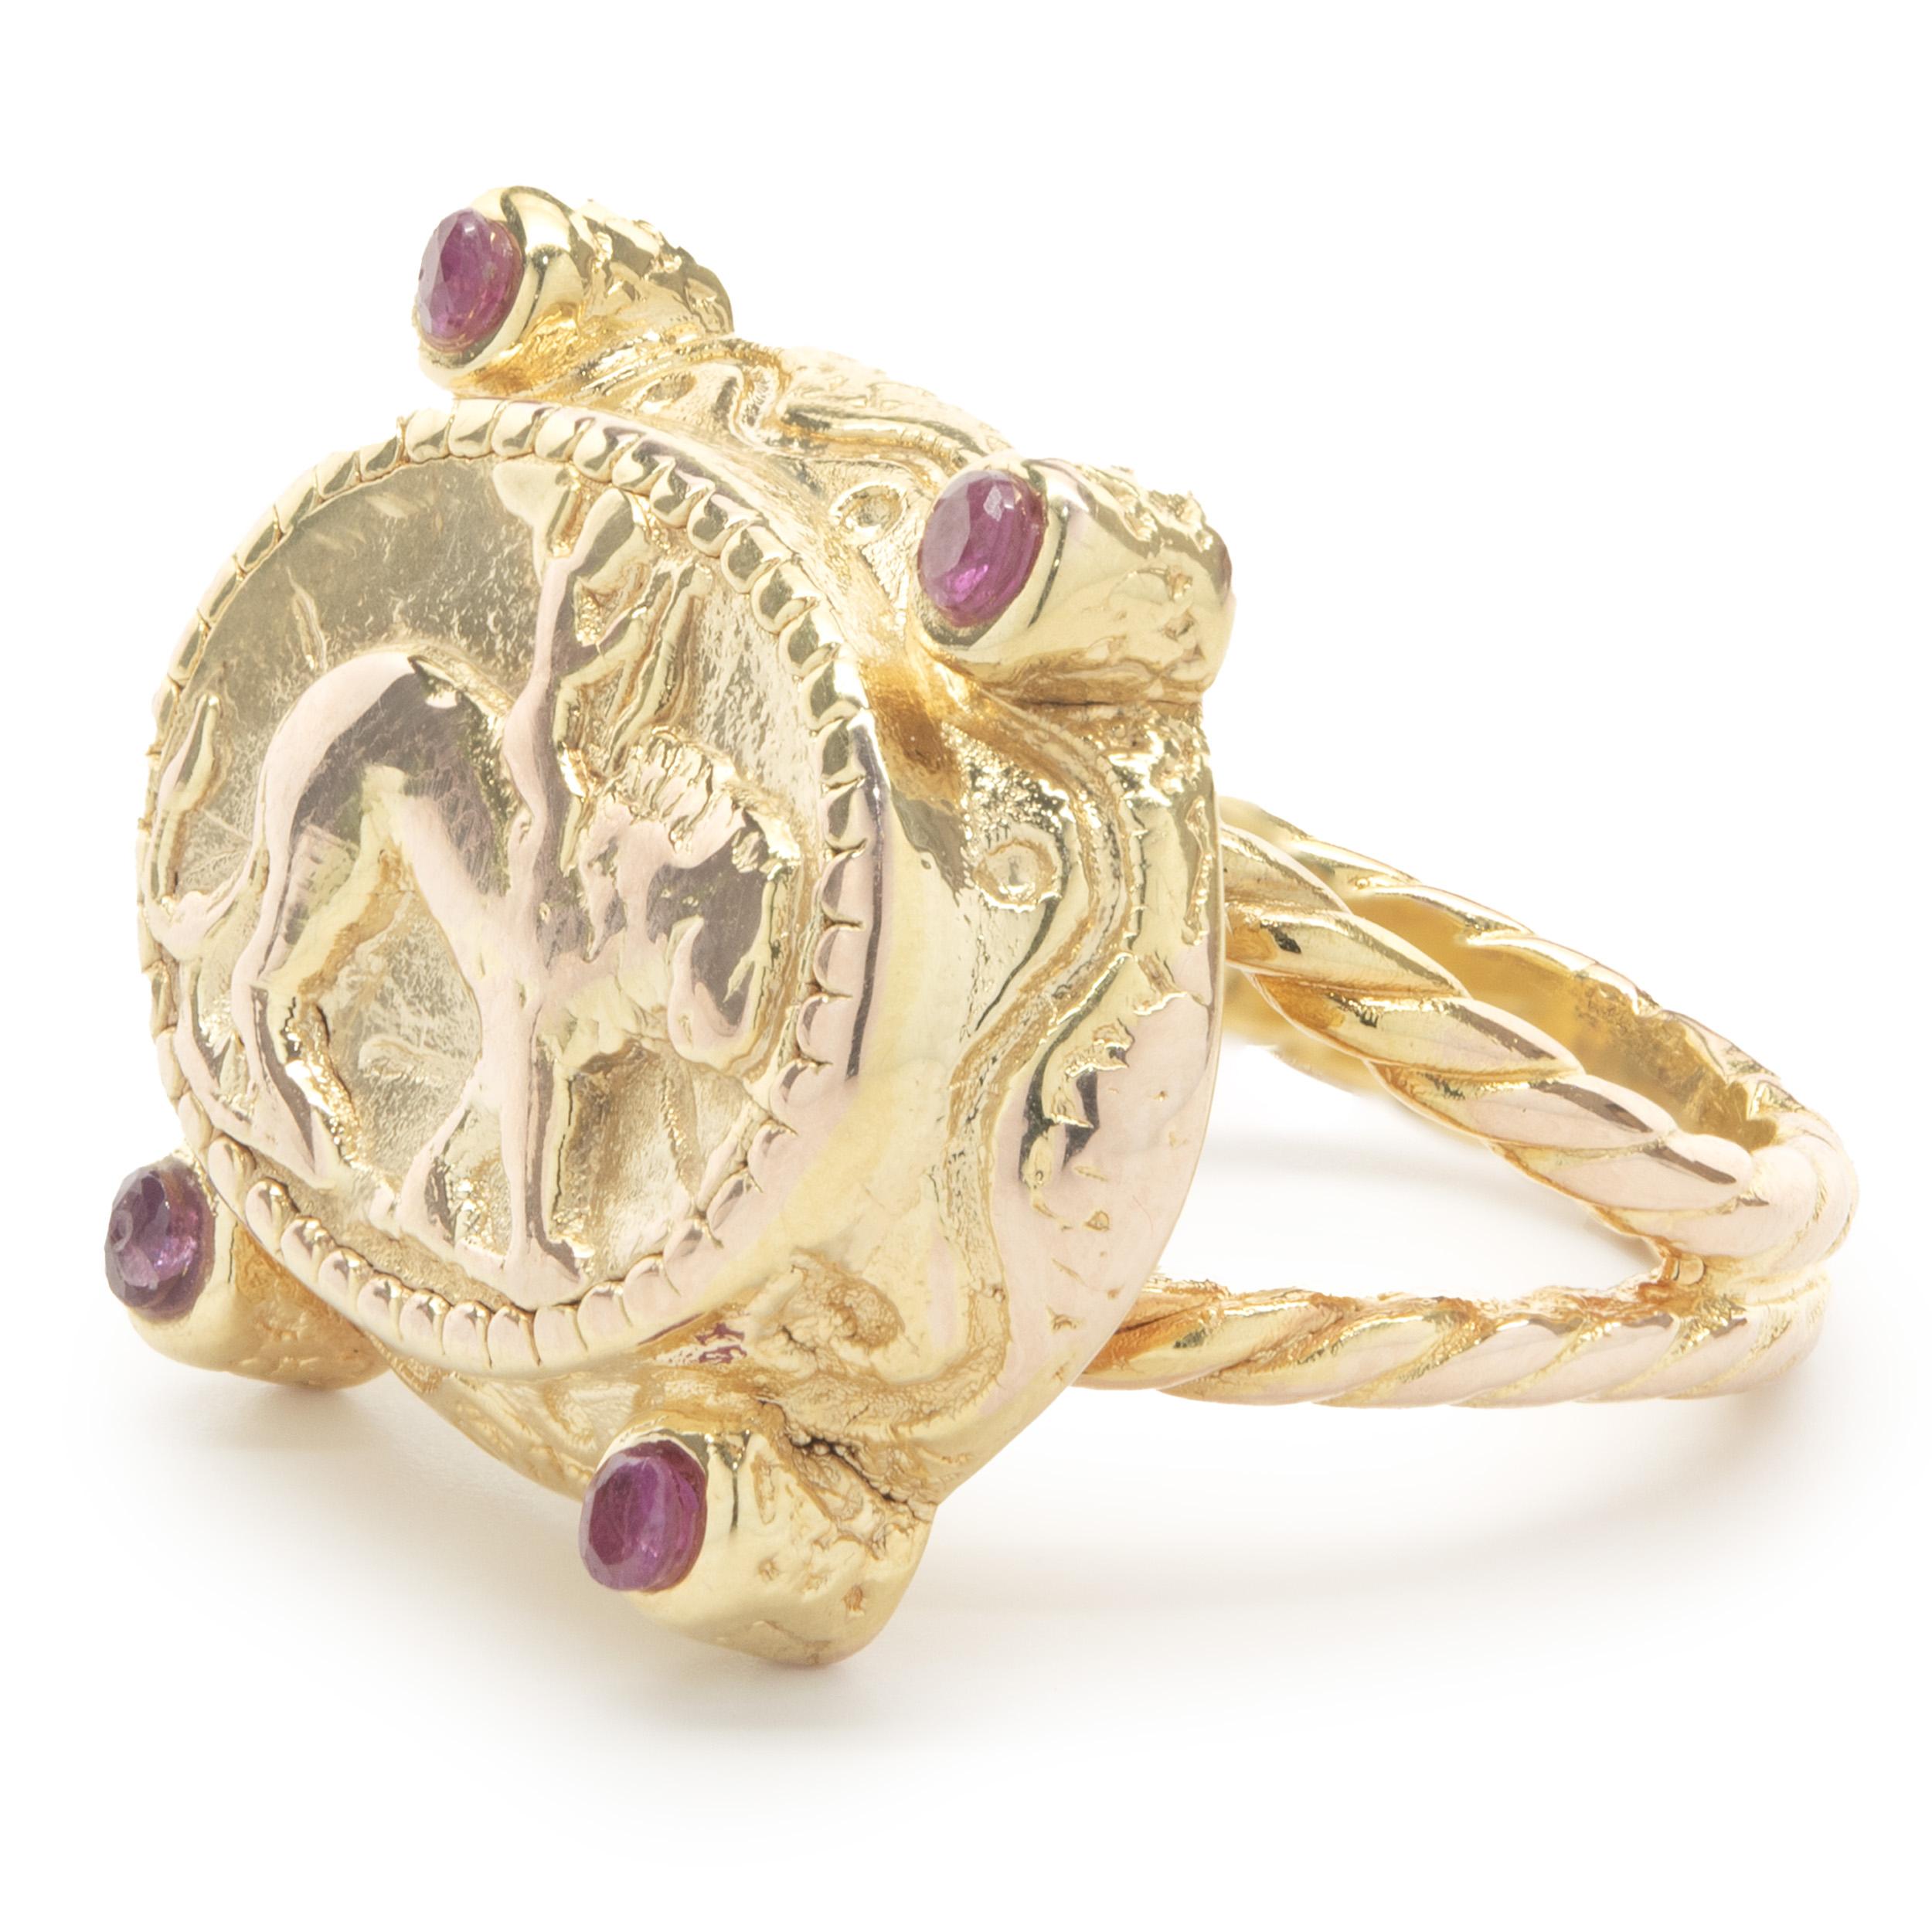 Cabochon 14 Karat Yellow Gold Vintage Ancient Roman Art Style Ring with Cabachon Rubies For Sale